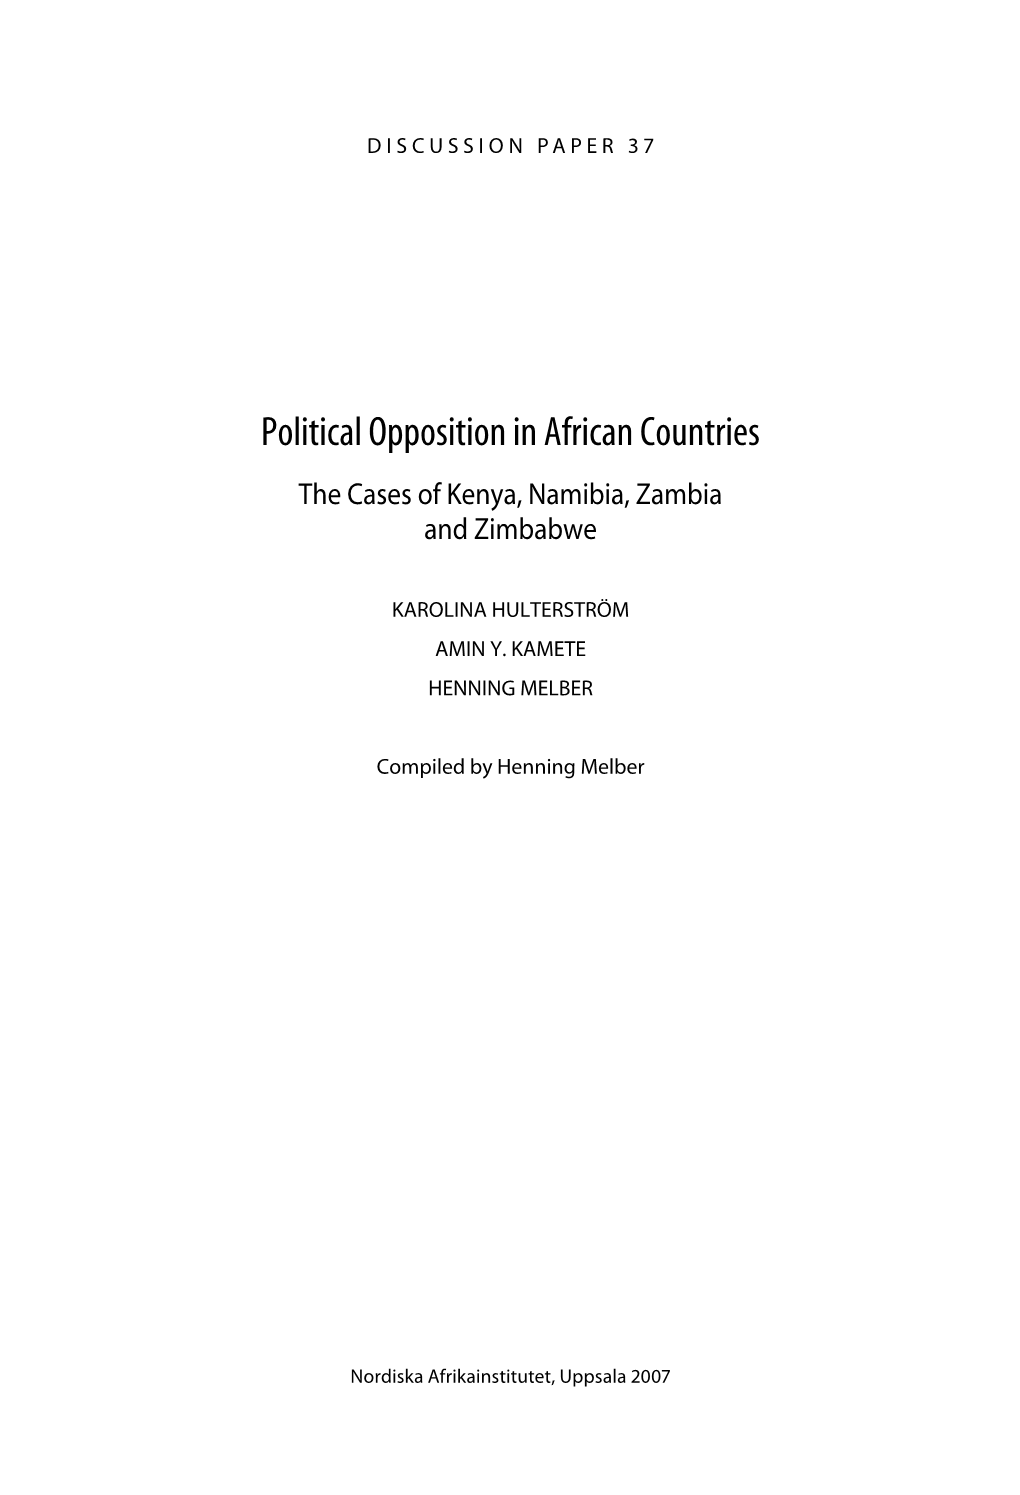 Political Opposition in African Countries the Cases of Kenya, Namibia, Zambia and Zimbabwe